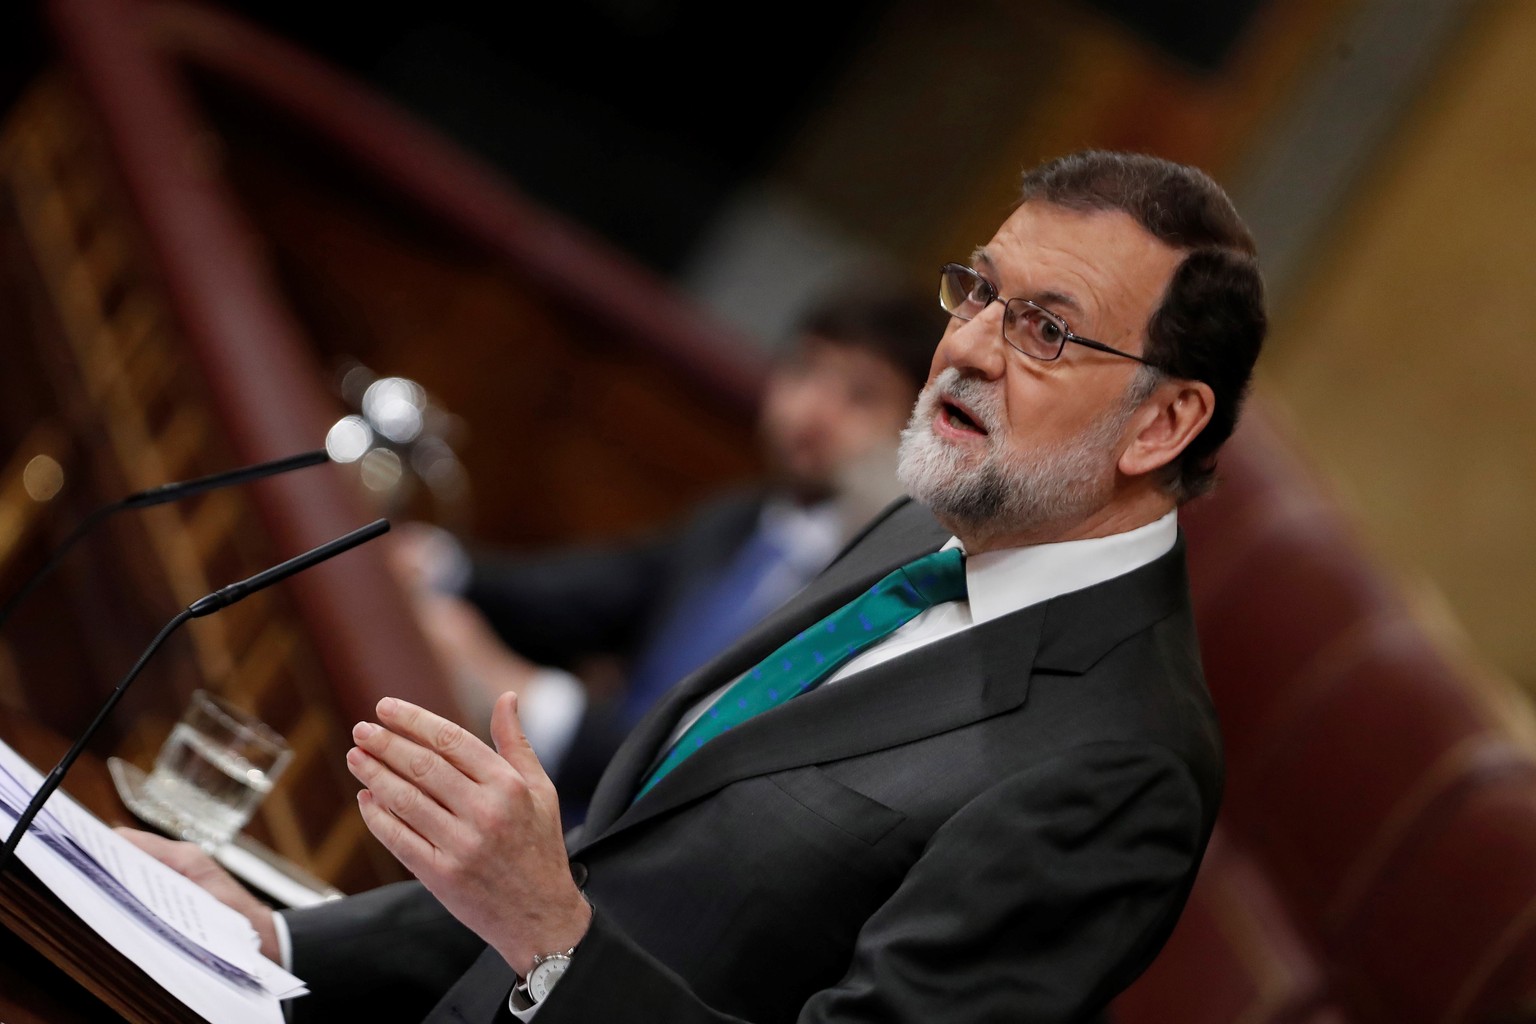 epa06774765 Spanish Prime Minister, Mariano Rajoy, delivers his speech during the no-confidence motion vote against him at the Parliament, in Madrid, Spain, 31 May 2018. Leader of Spanish Socialist Pa ...